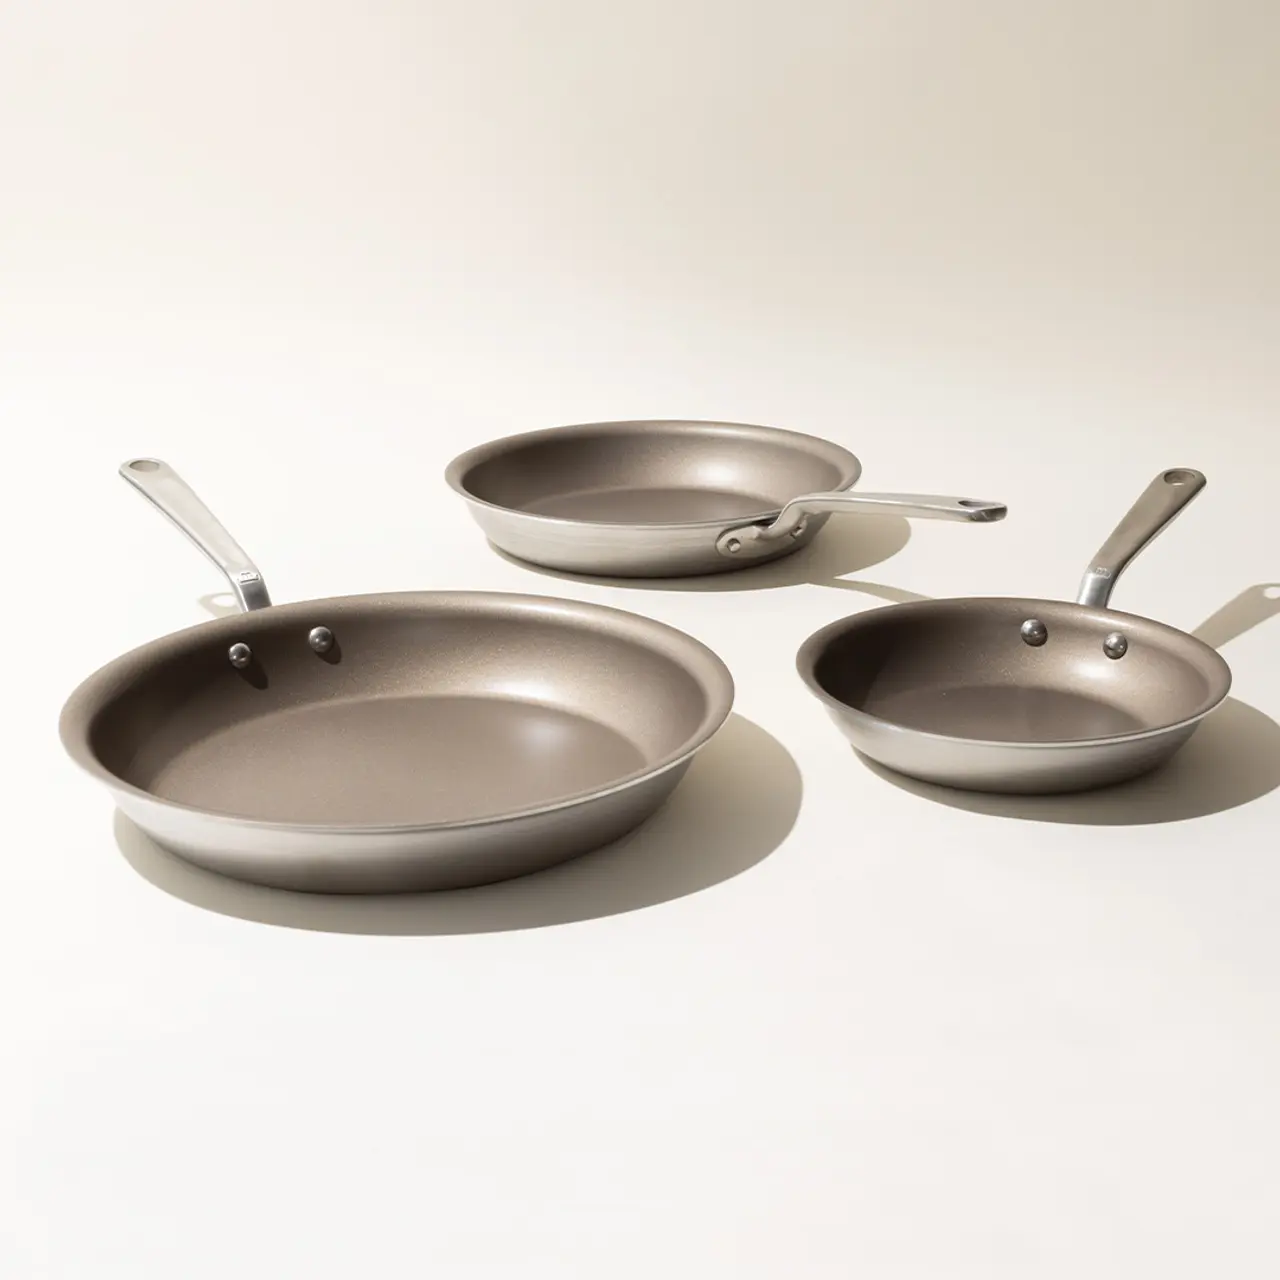 Three different-sized, non-stick frying pans with metallic handles are arranged on a light background.